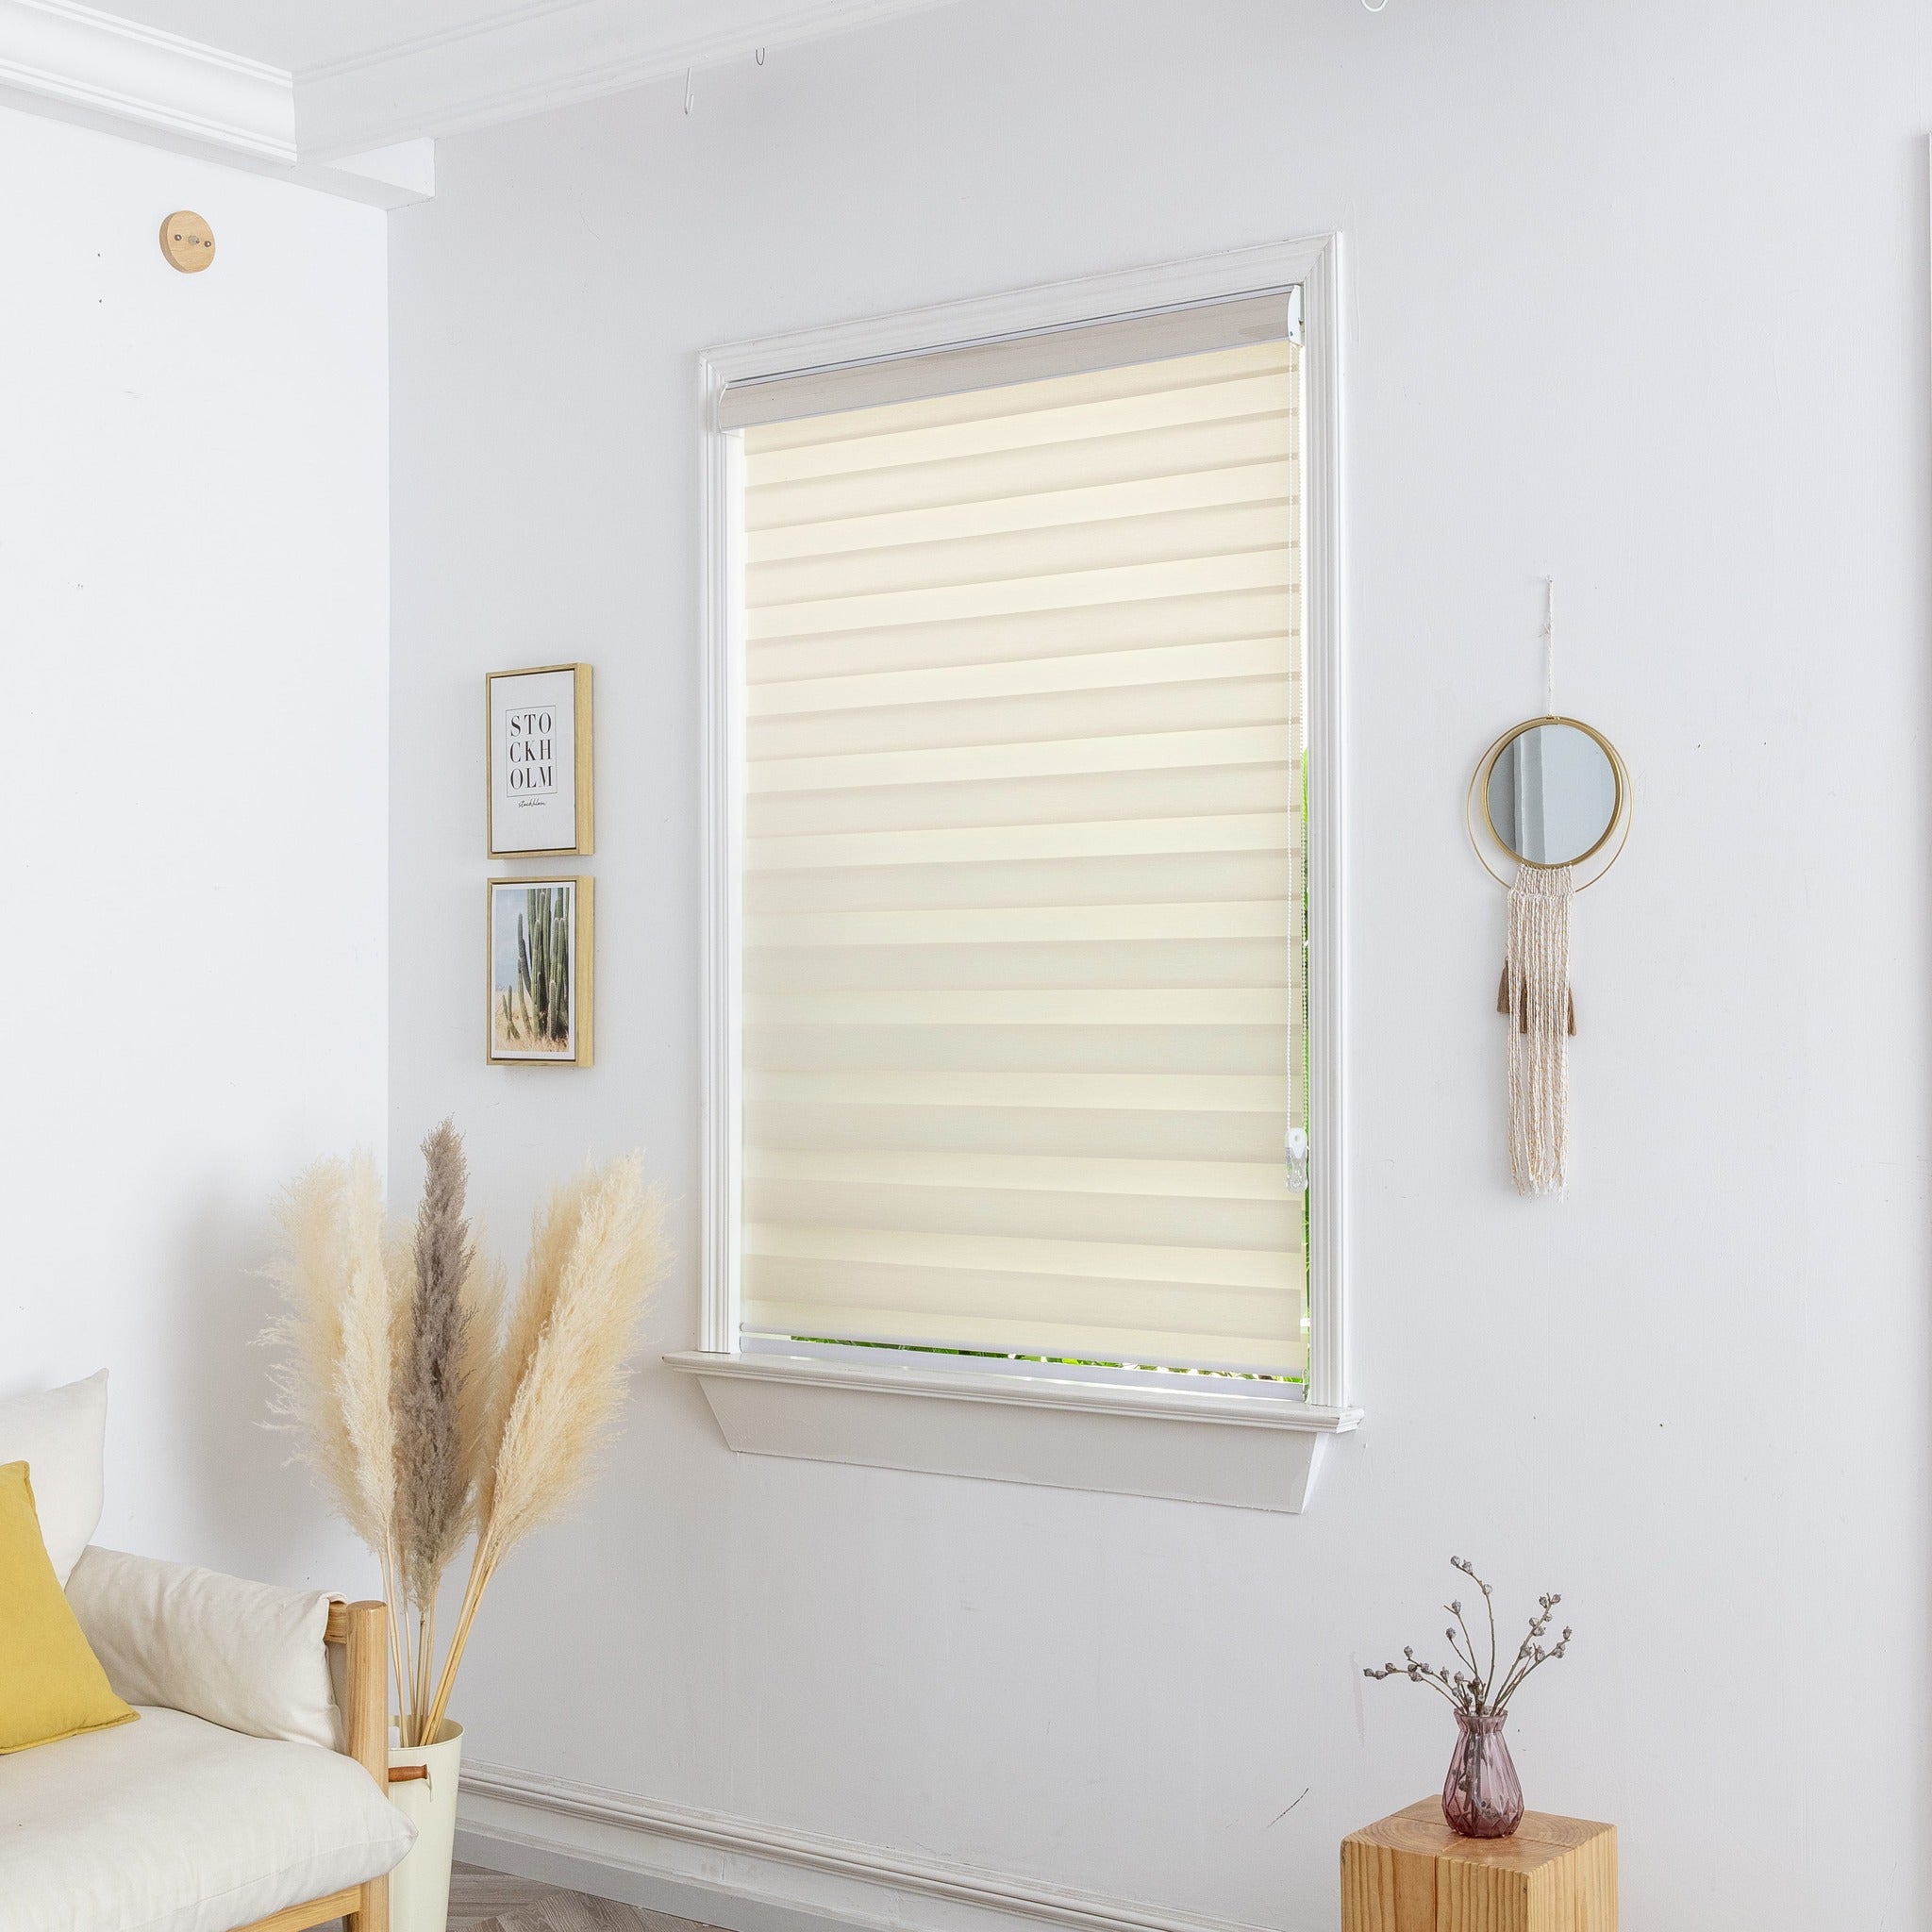 S3-001 Light Filtering Zebra Blind Dual Shade - Water Proof